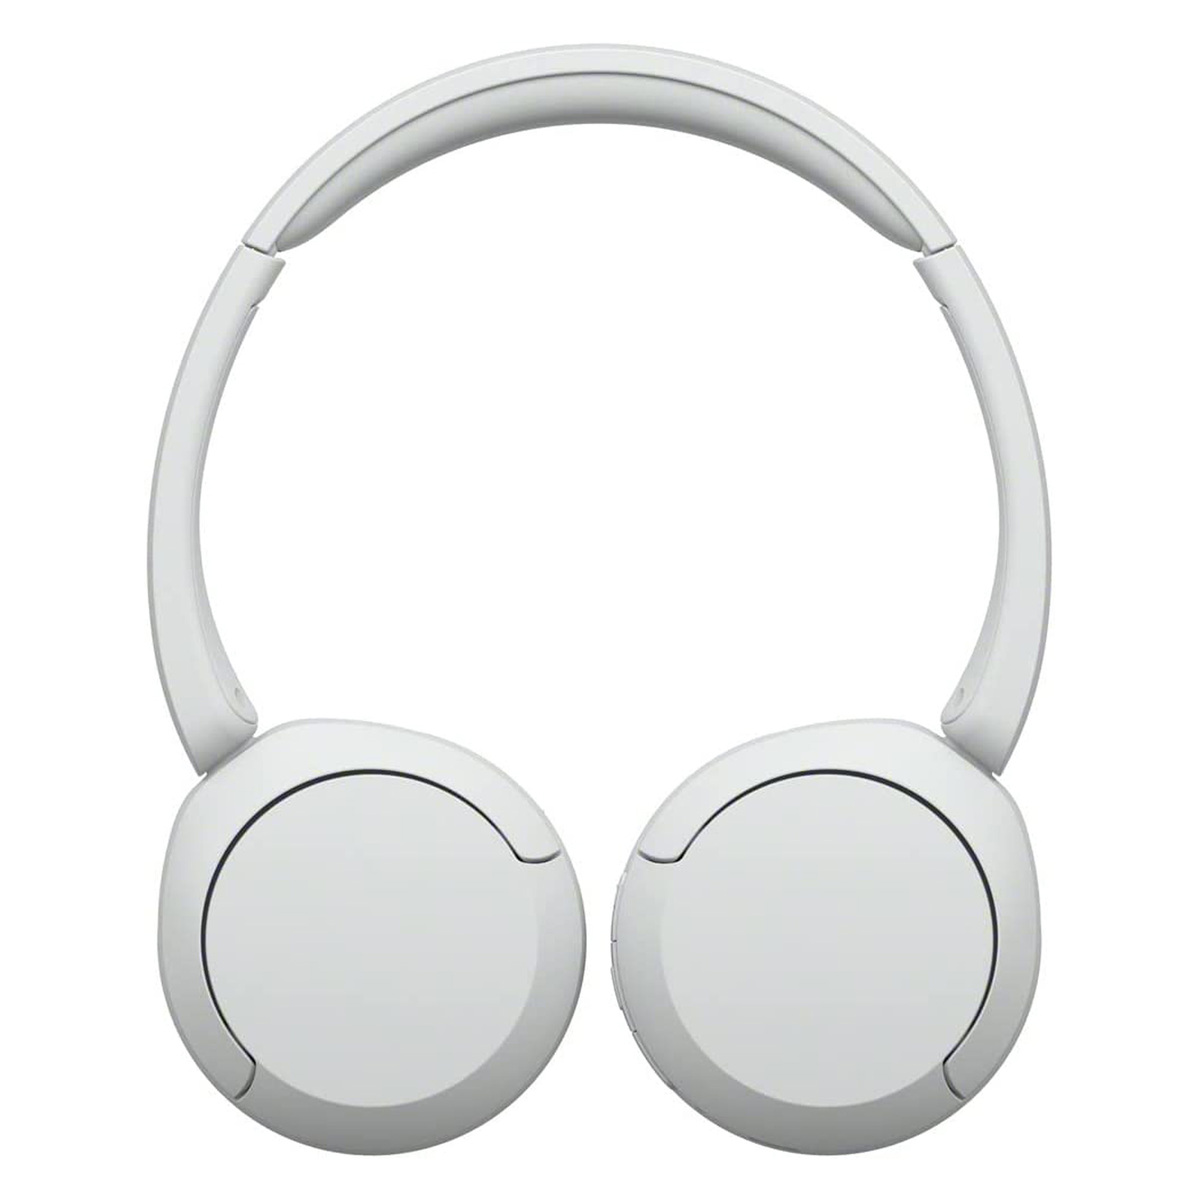 Sony Wireless Headphones with Microphone, White, WH-CH520